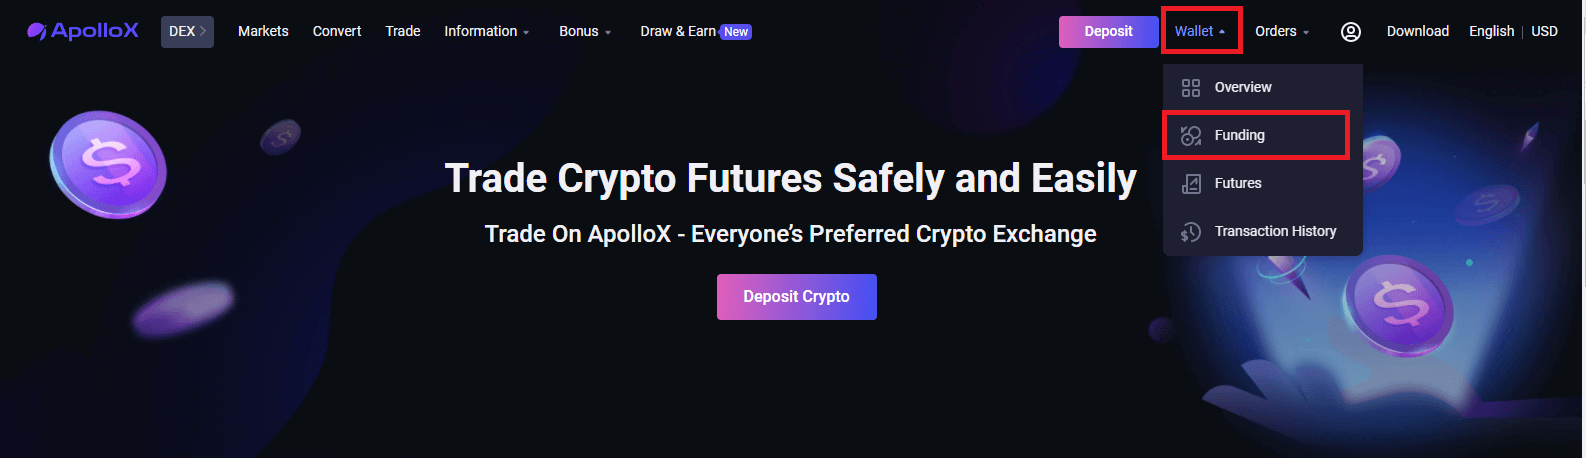 How to Withdraw and make a Deposit in ApolloX